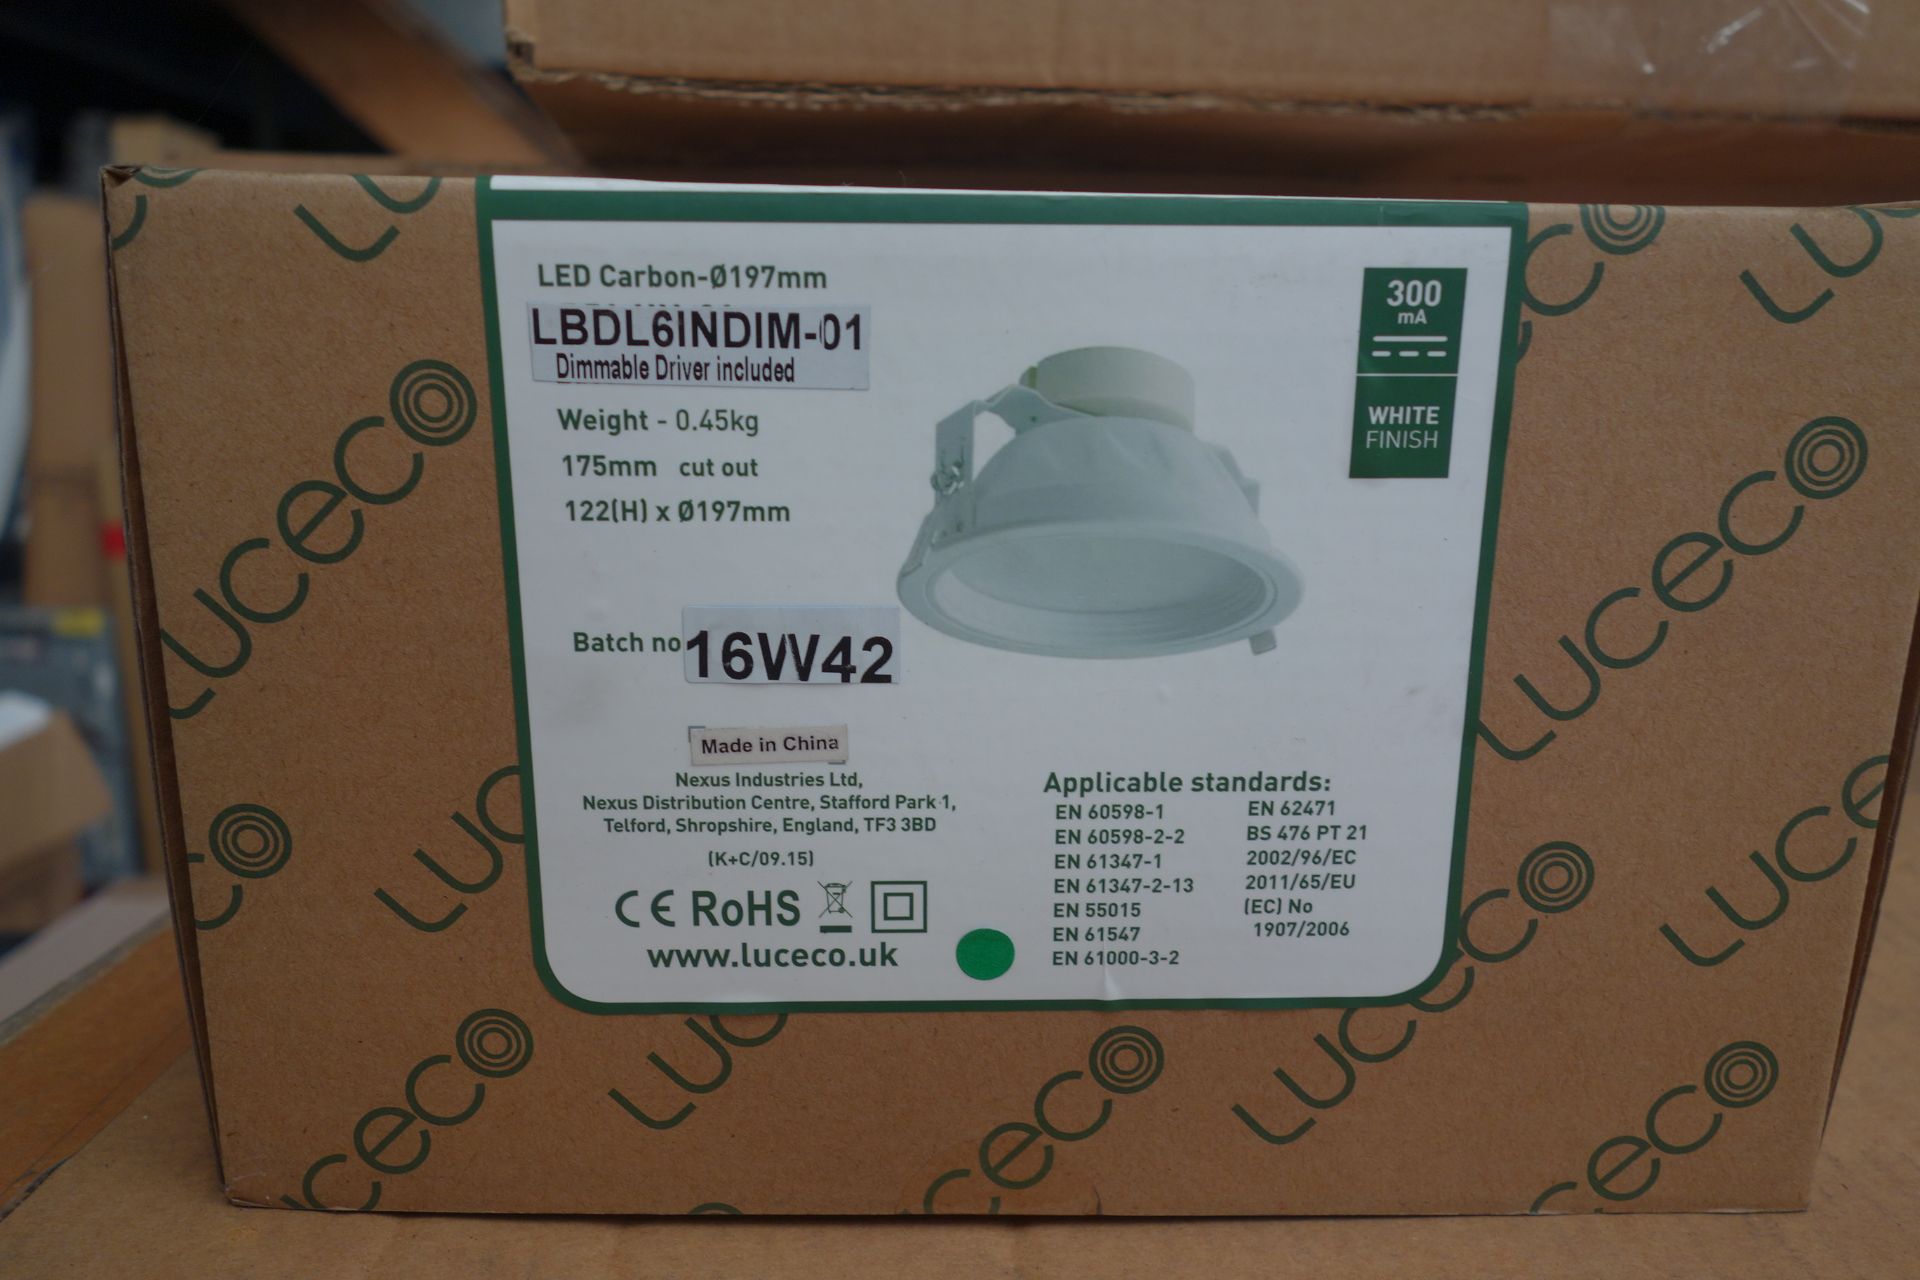 24 X Luceco LBDL6INDIM-01 12W LED Downlight 197MM Diameter c/w Dimmable Driver 4200K White Finish